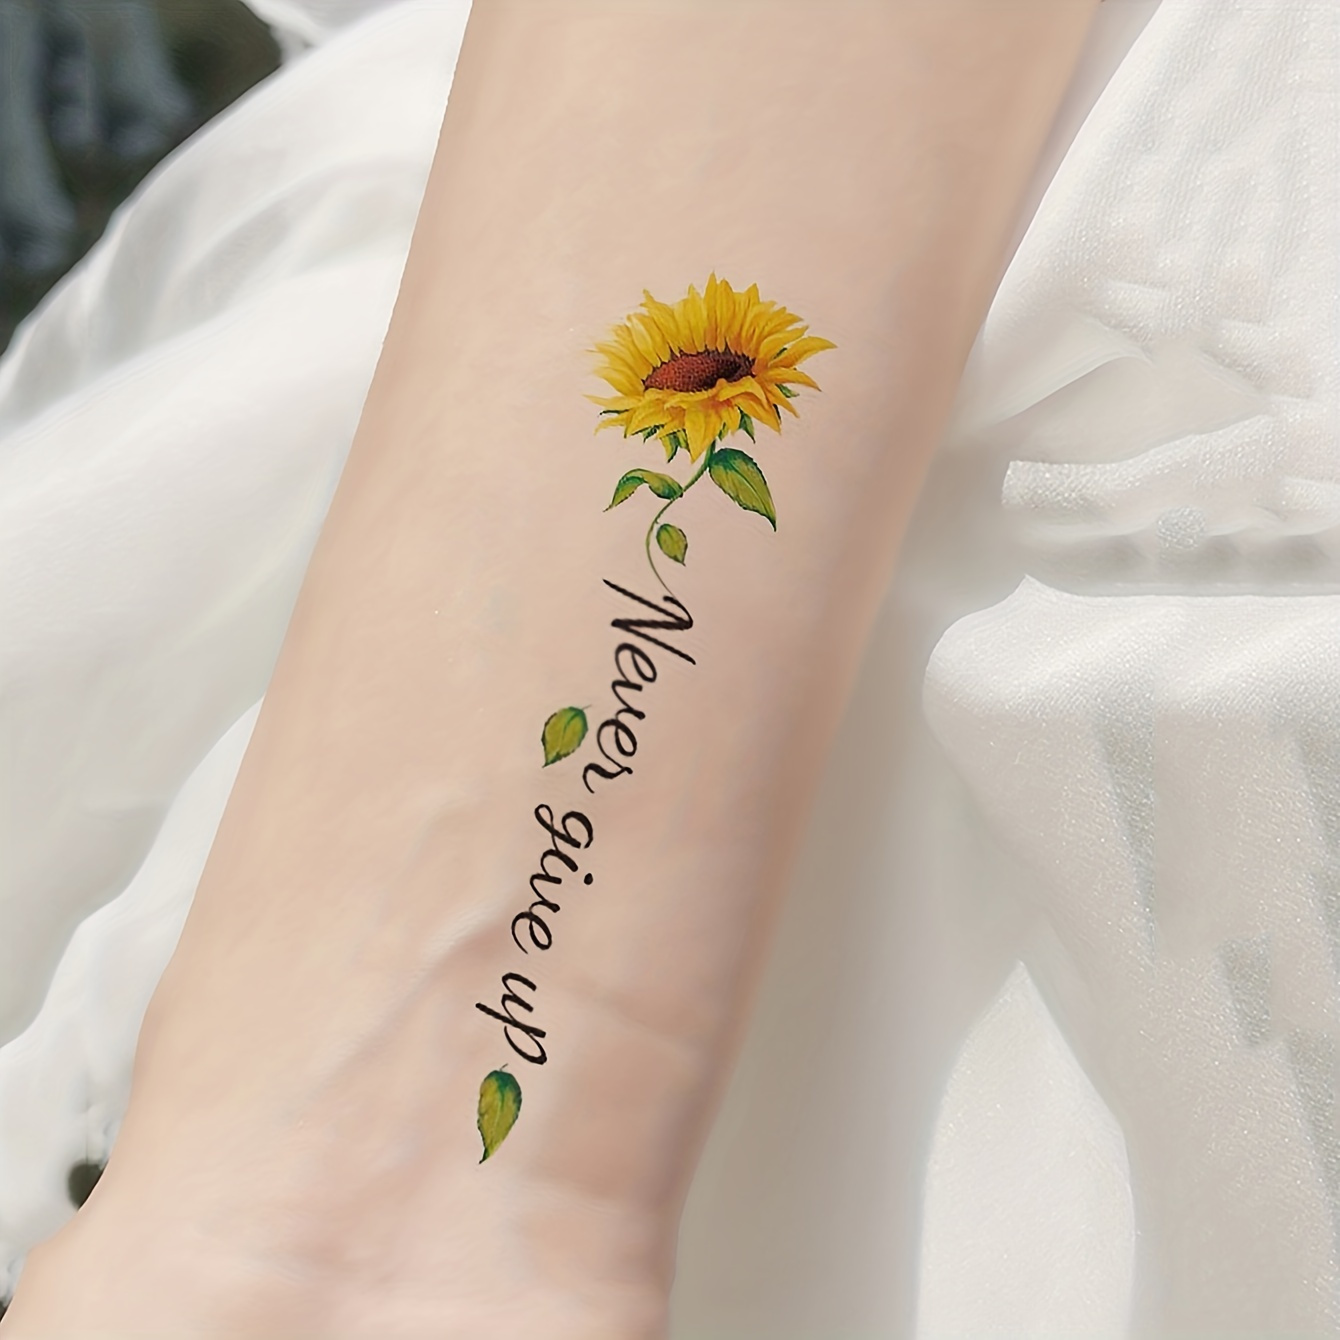 

1 Sheet Of Sunflower Pattern Wrist Body Small Part Tattoo Sticker Can Last For 2-5 Days, Waterproof And Realistic Tattoo Sticker For Both Men And Women